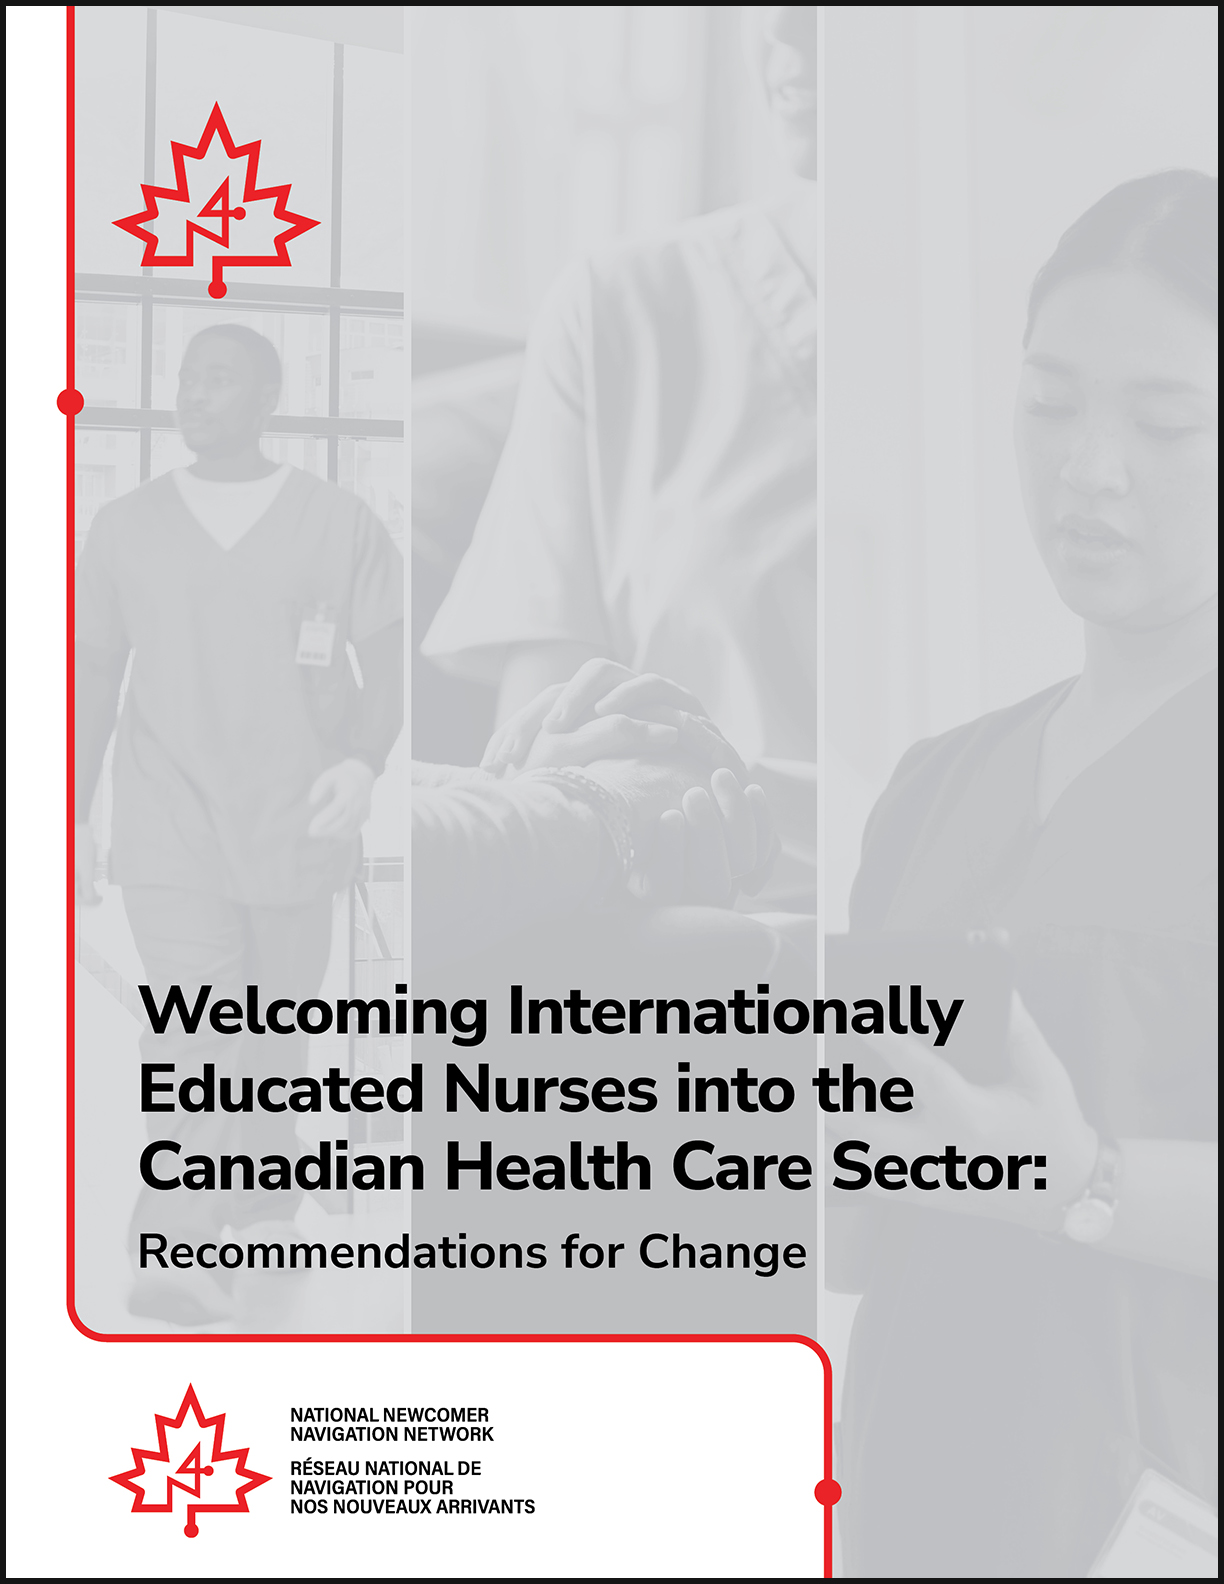 Welcoming Internationally Educated Nurses into the Canadian Health Care Sector: Recommendations for Change